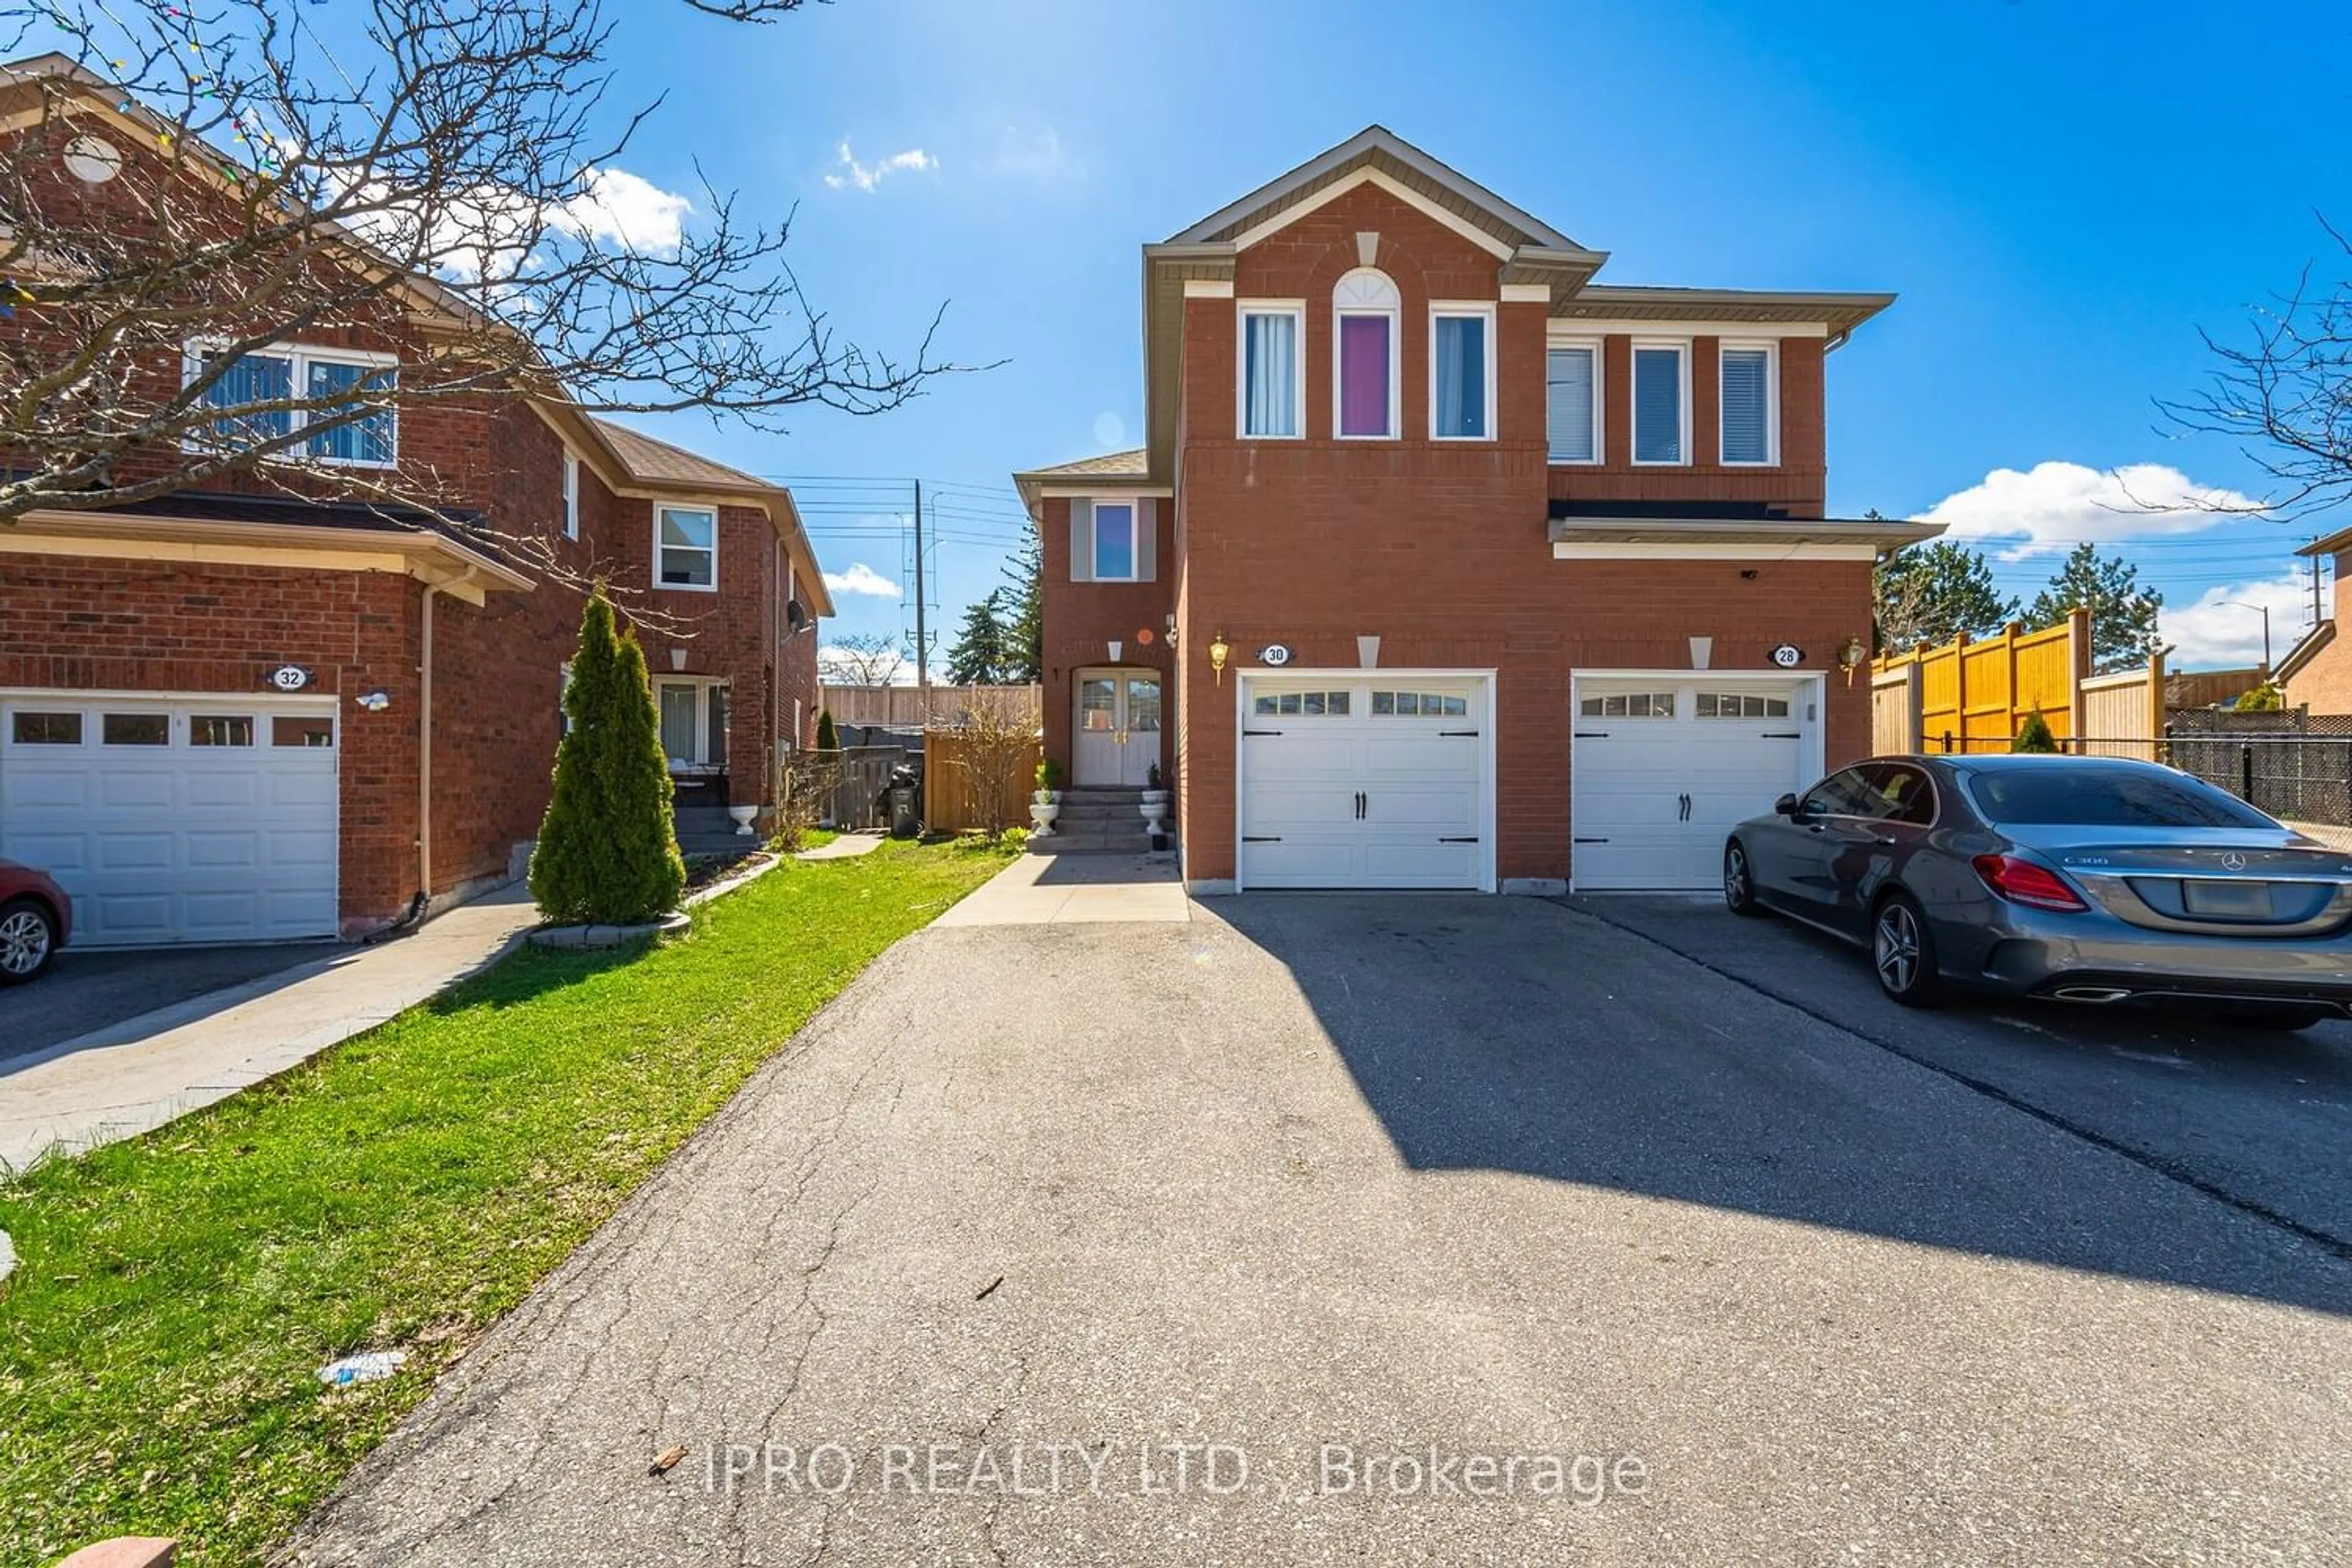 Frontside or backside of a home for 30 Mount Ranier Cres, Brampton Ontario L6R 2K9